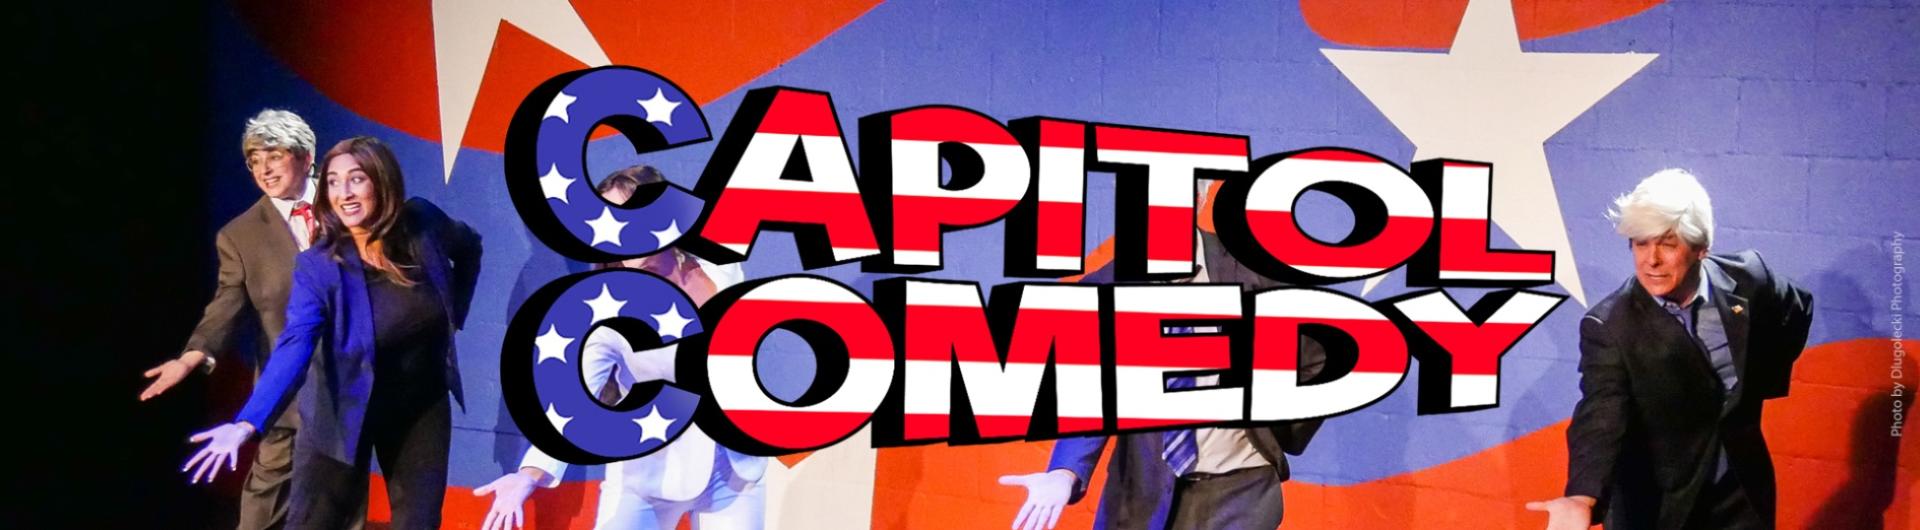 Members of the troupe on stage with the words Capitol Comedy in the center overlaid with the American flag.